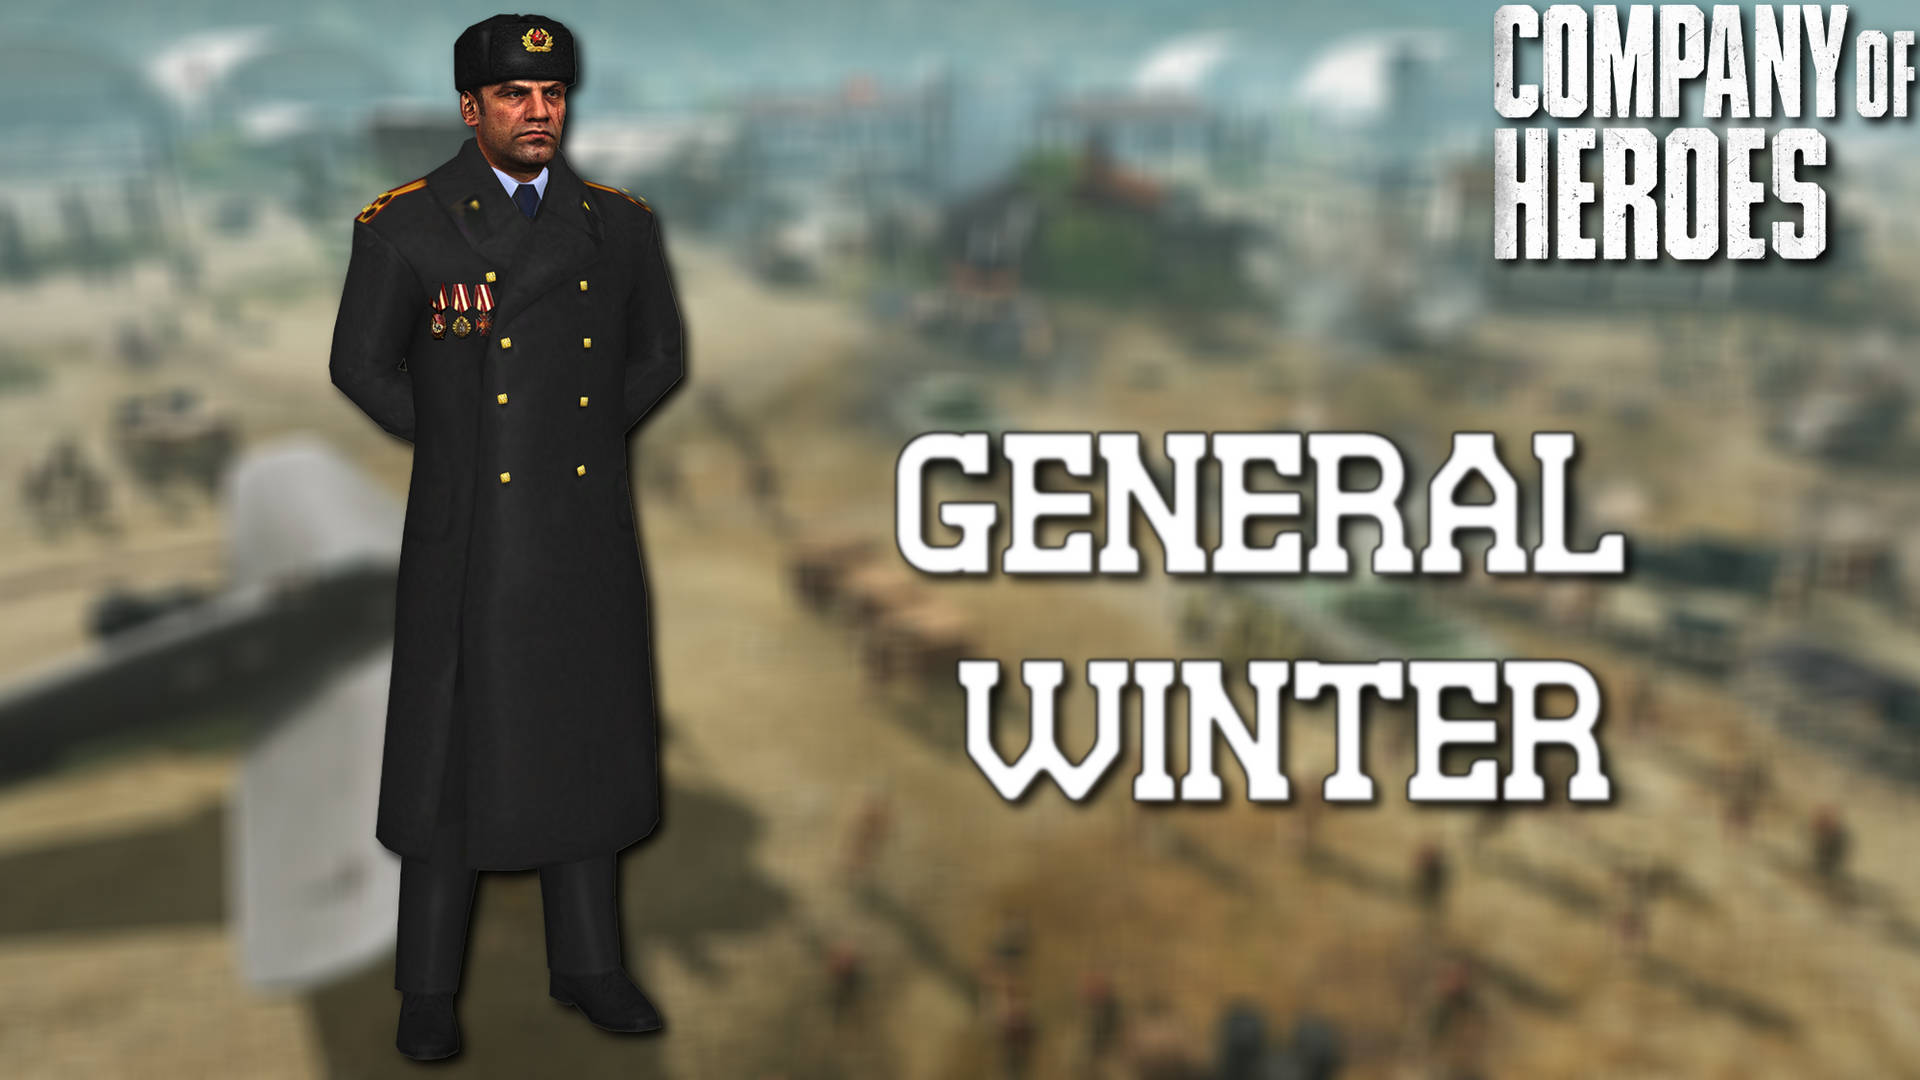 Company Of Heroes 2 General Winter Background